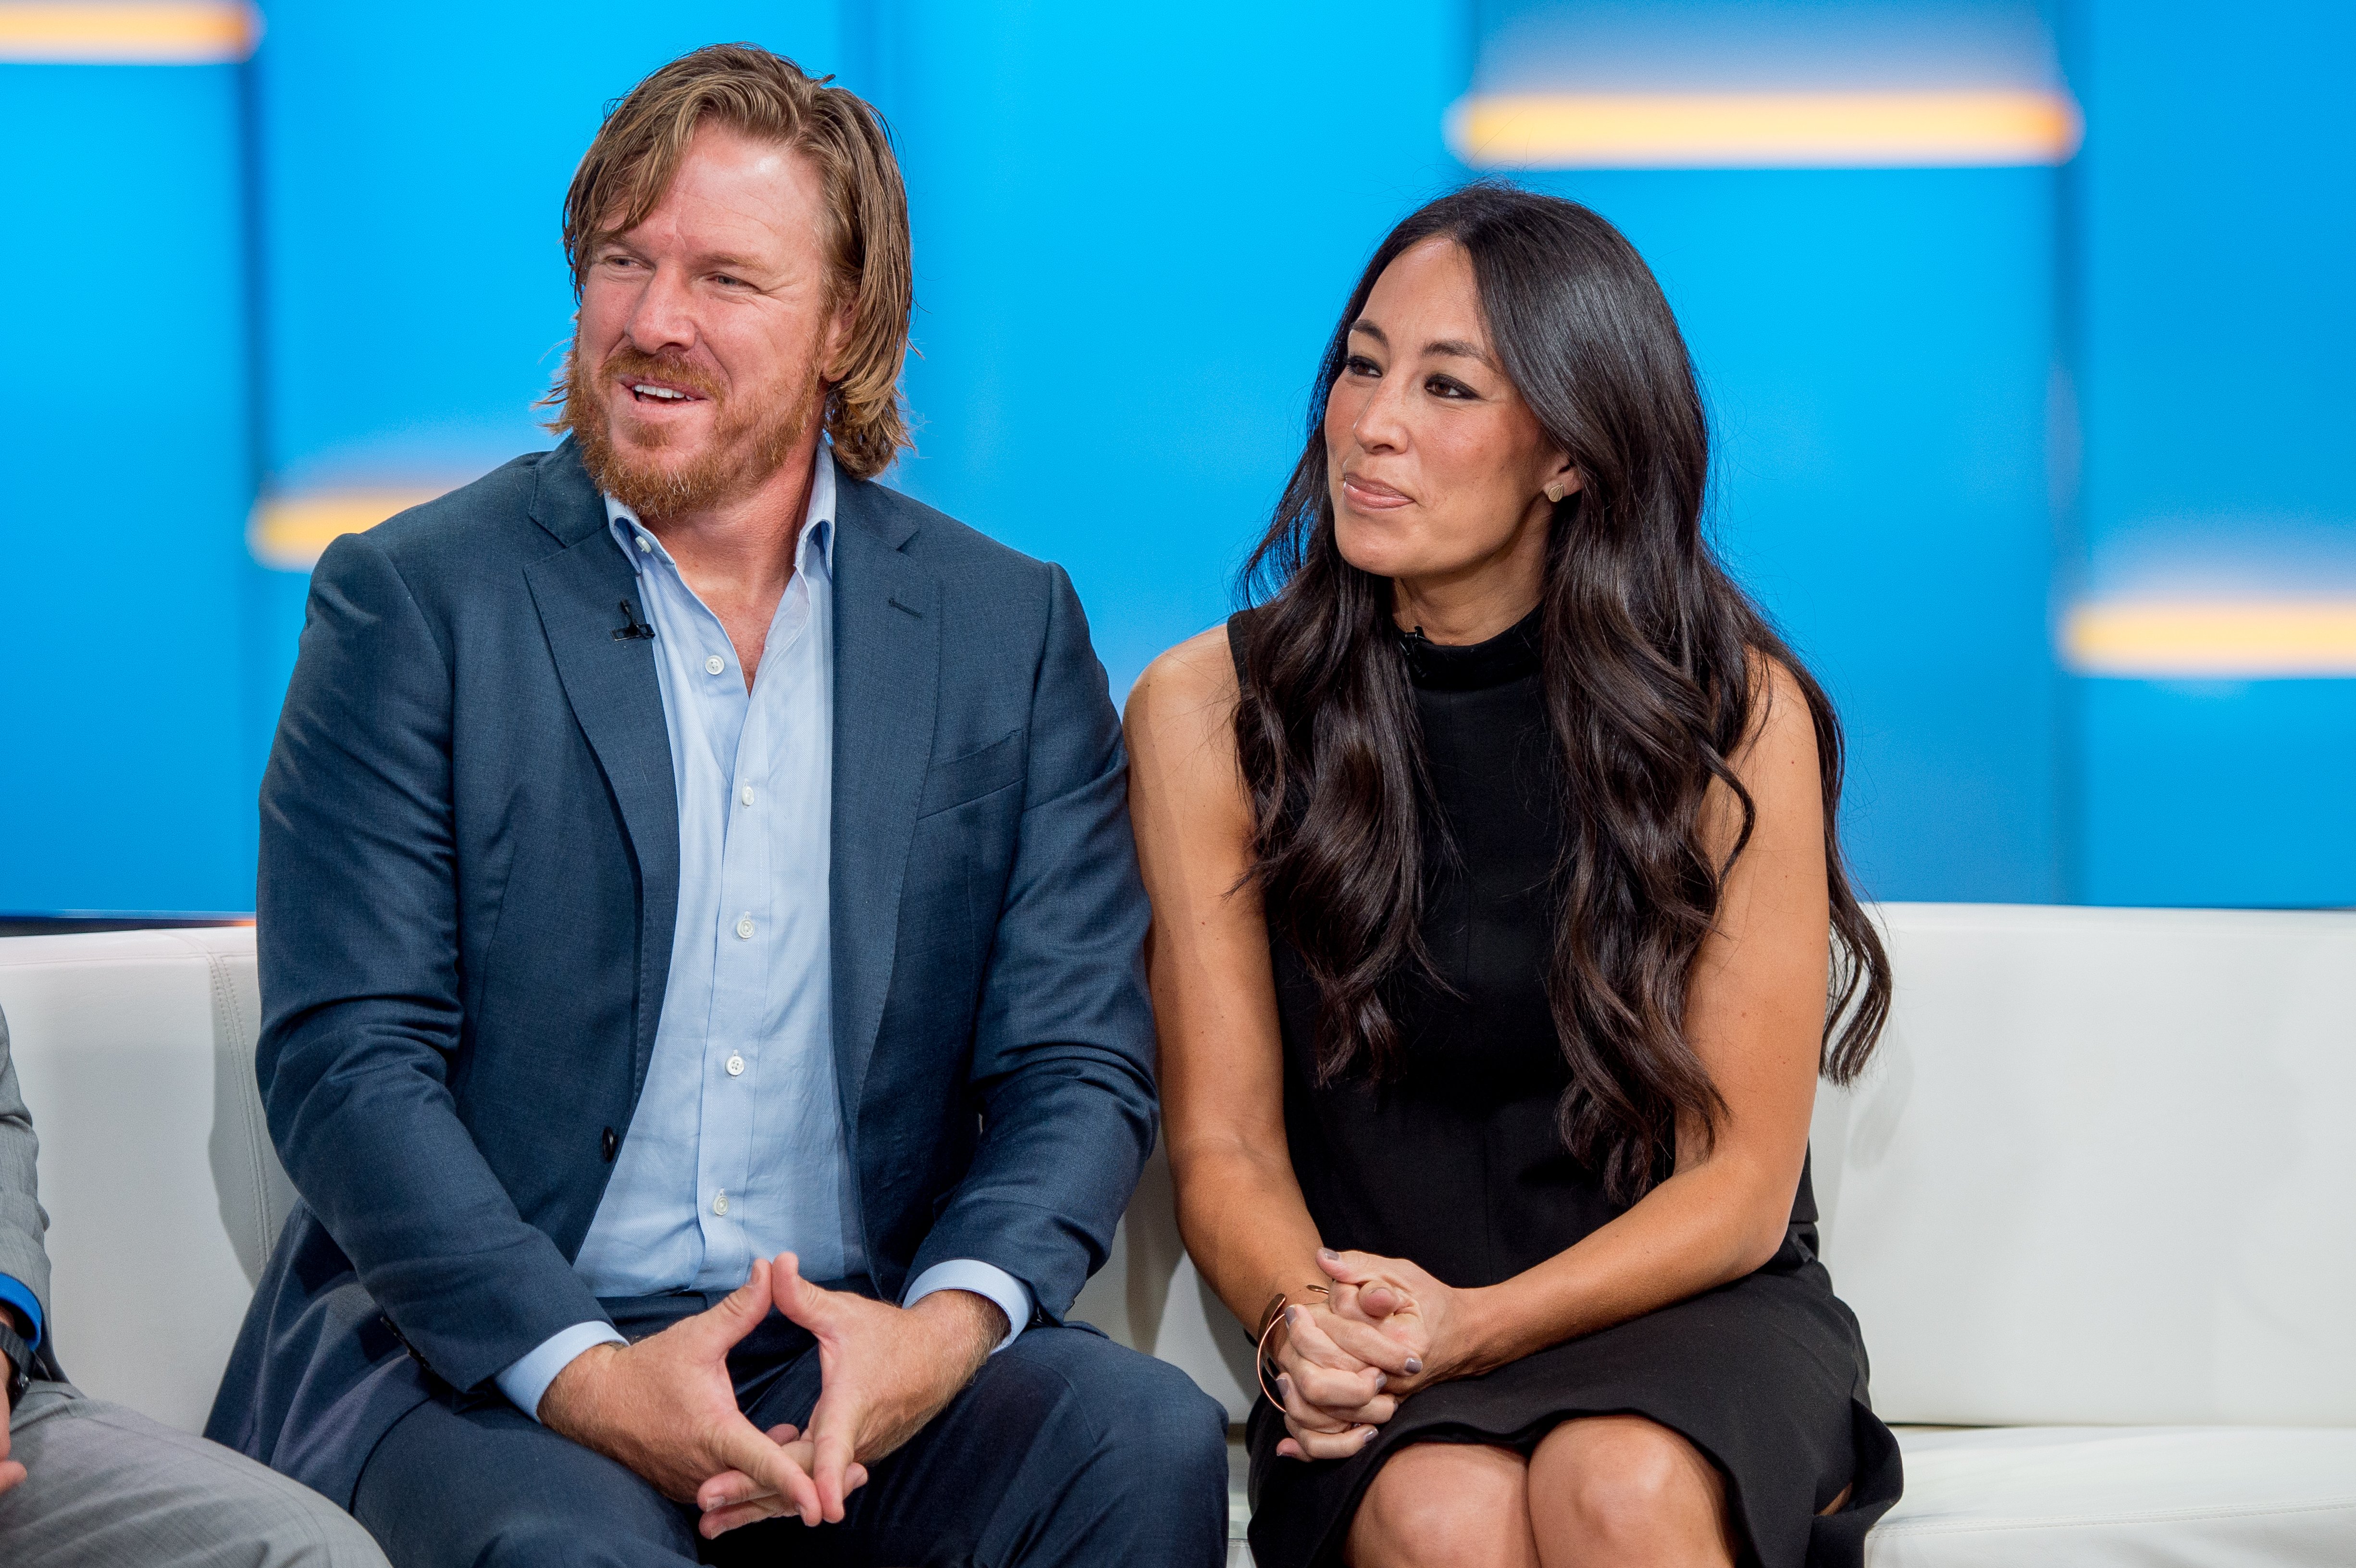 Chip and Joanna Gaines visit "Fox & Friends" to discuss the book 'Capital Gaines' and the ending of the show 'Fixerupper' at Fox News Studios on October 18, 2017 in New York City. | Photo: GettyImages